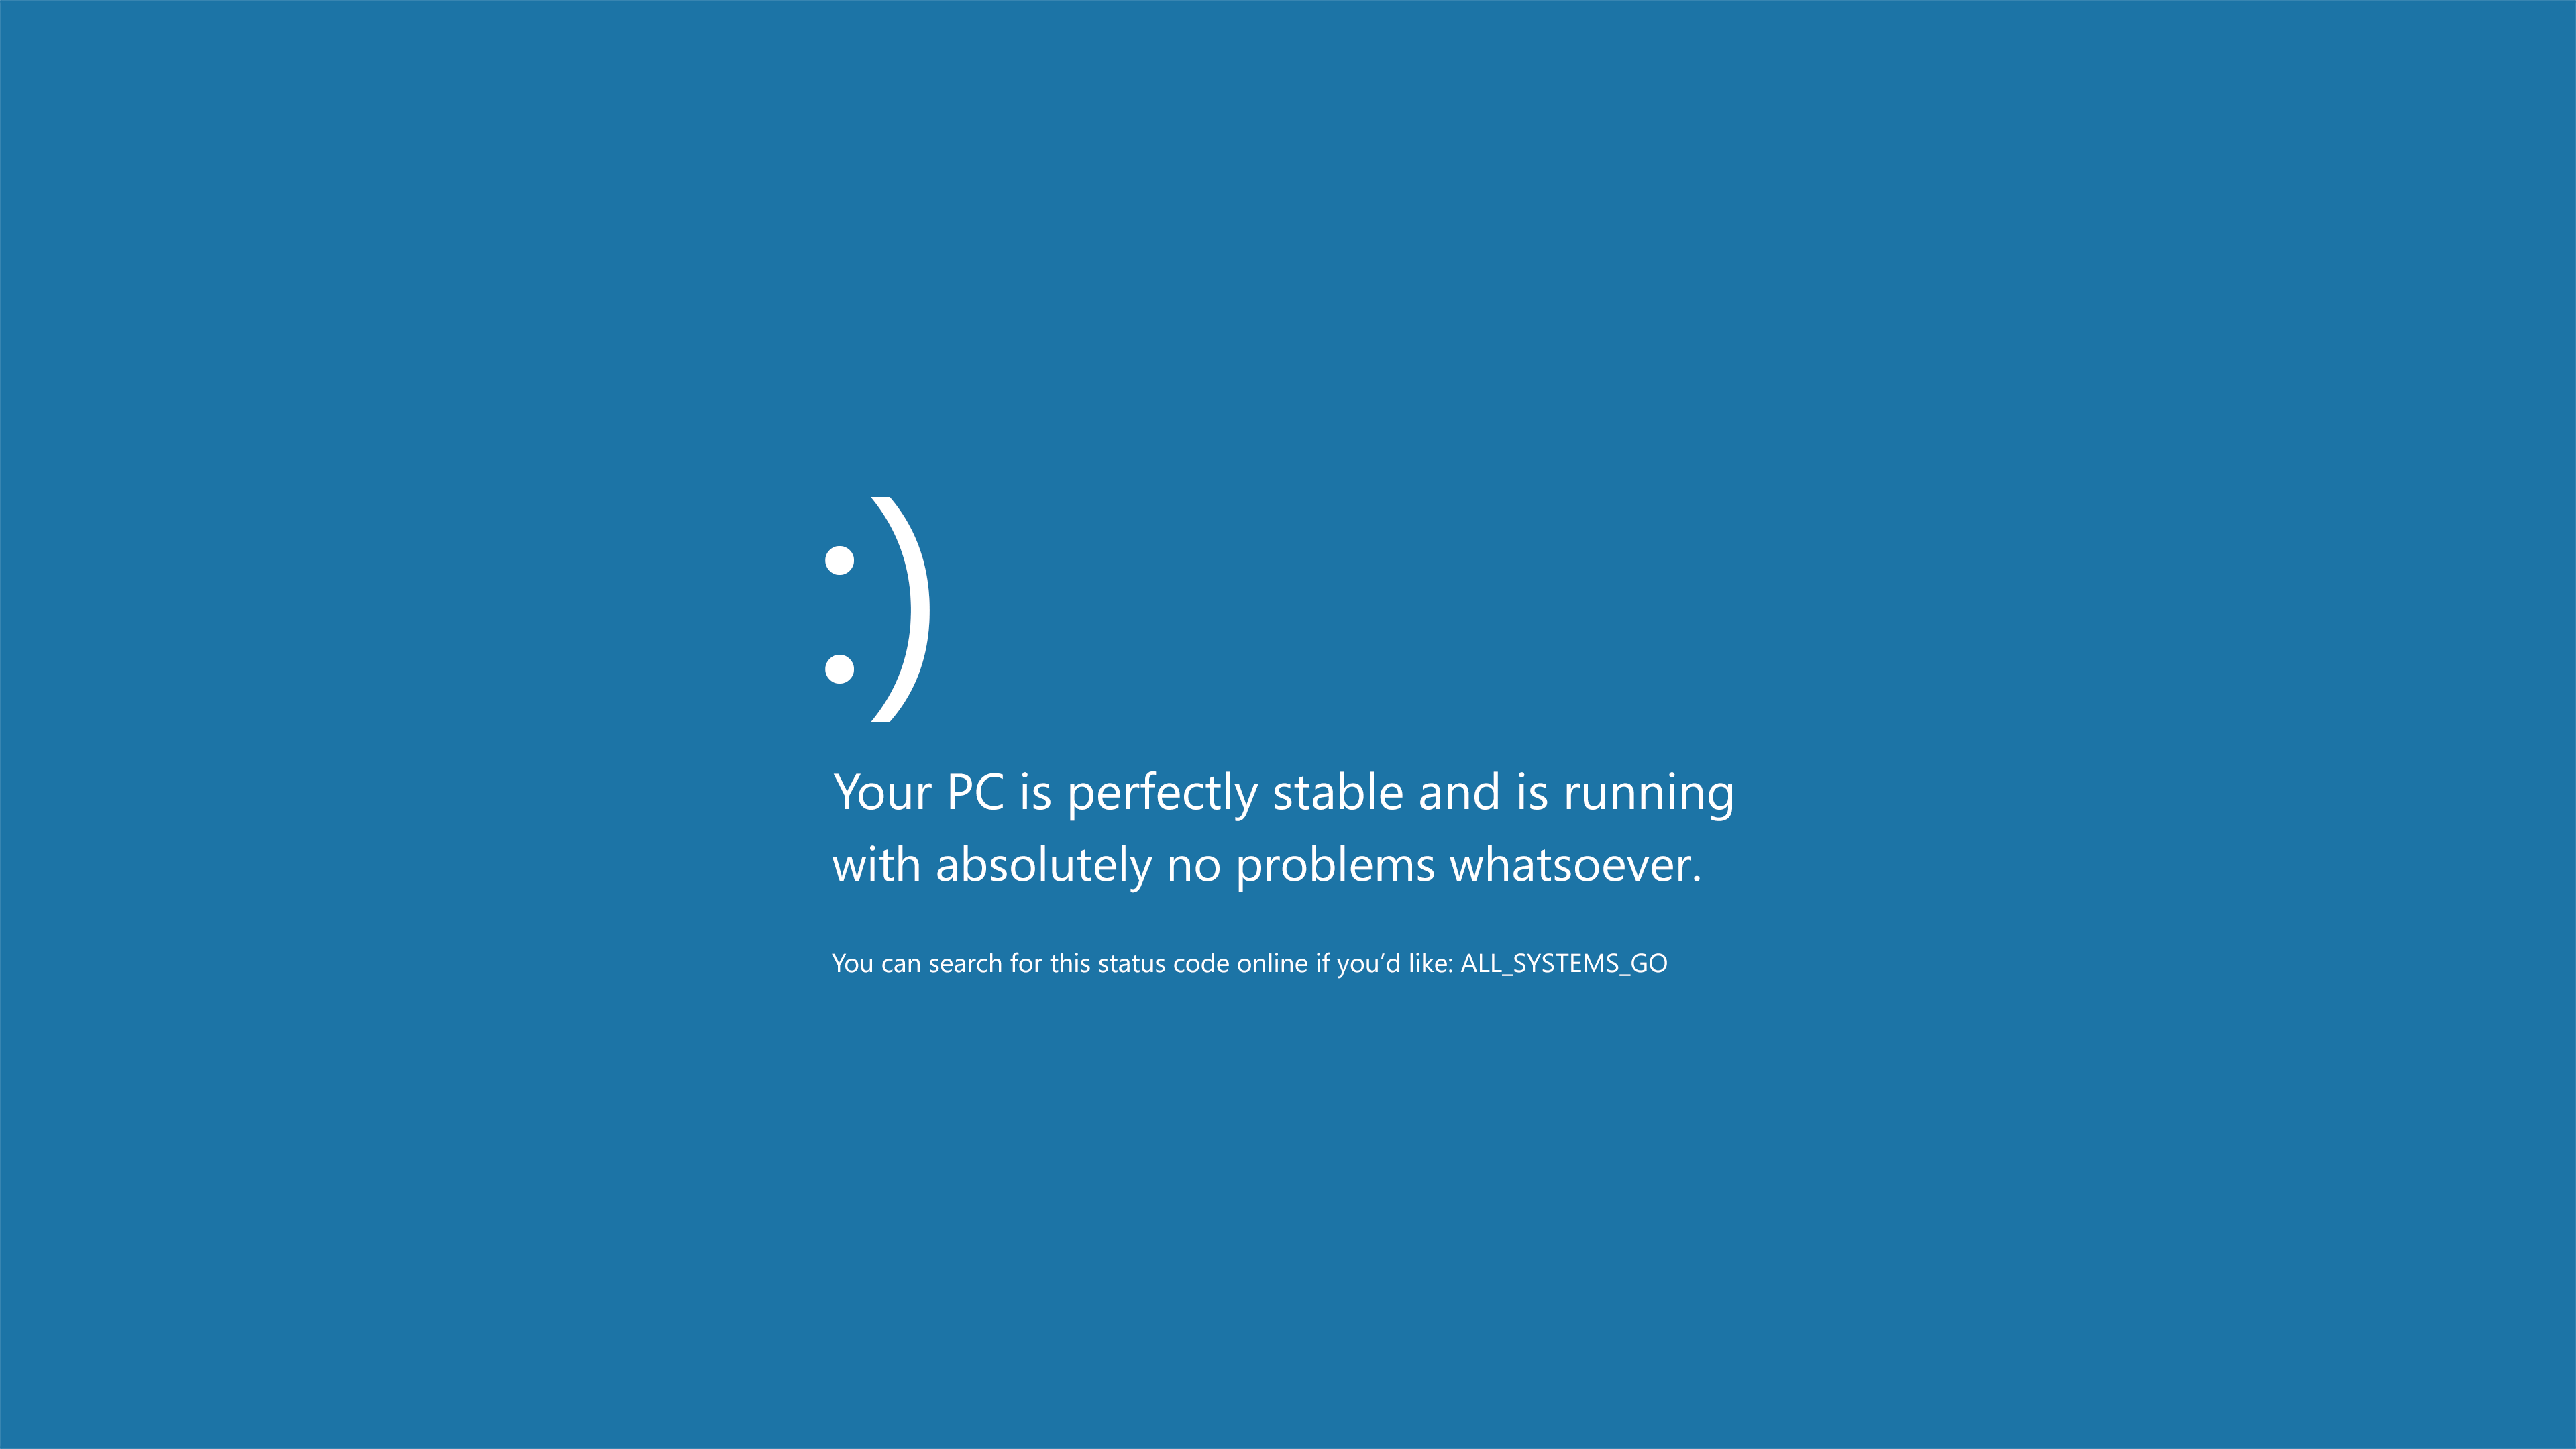 This 4k Bsod Wallpaper Is The Perfect Choice For Windows Fanboys